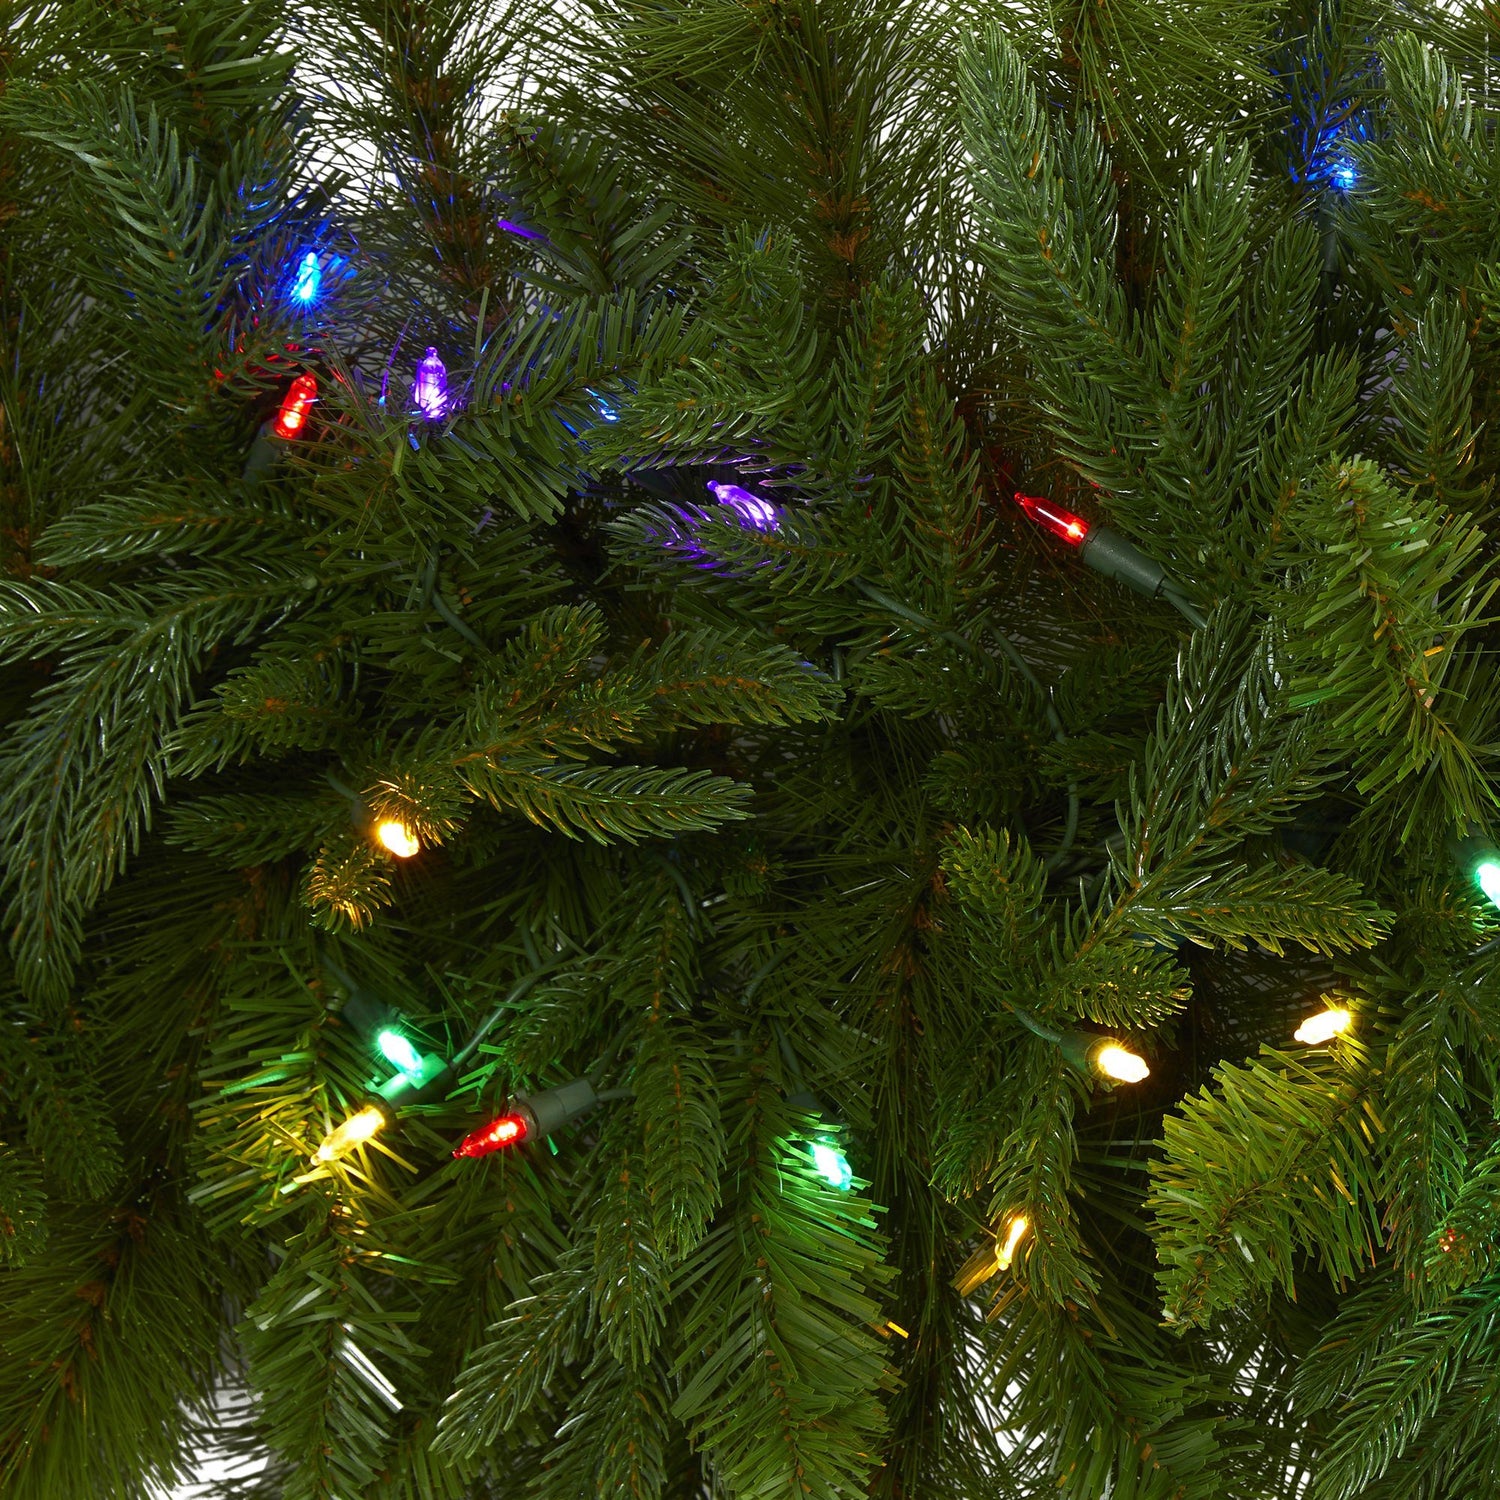 6' x 18” Christmas Pine Extra Wide Artificial Garland with 100 Multicolored LED Lights